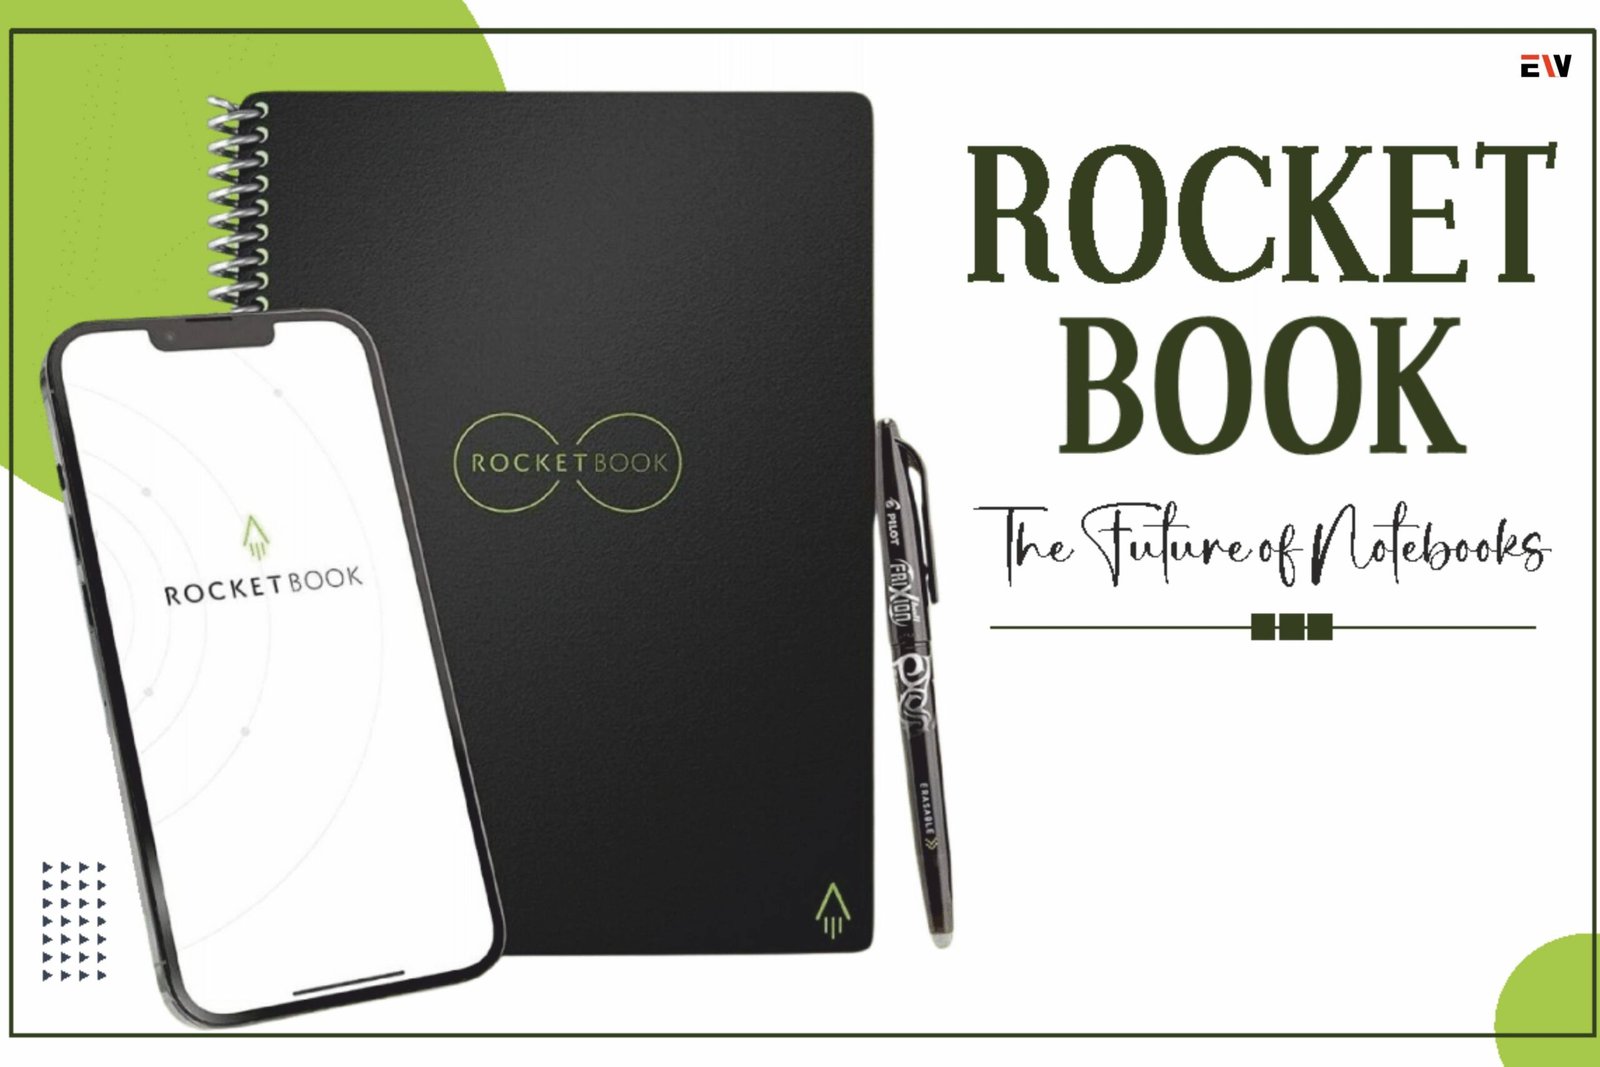 Rocketbook: The Future of Notebooks